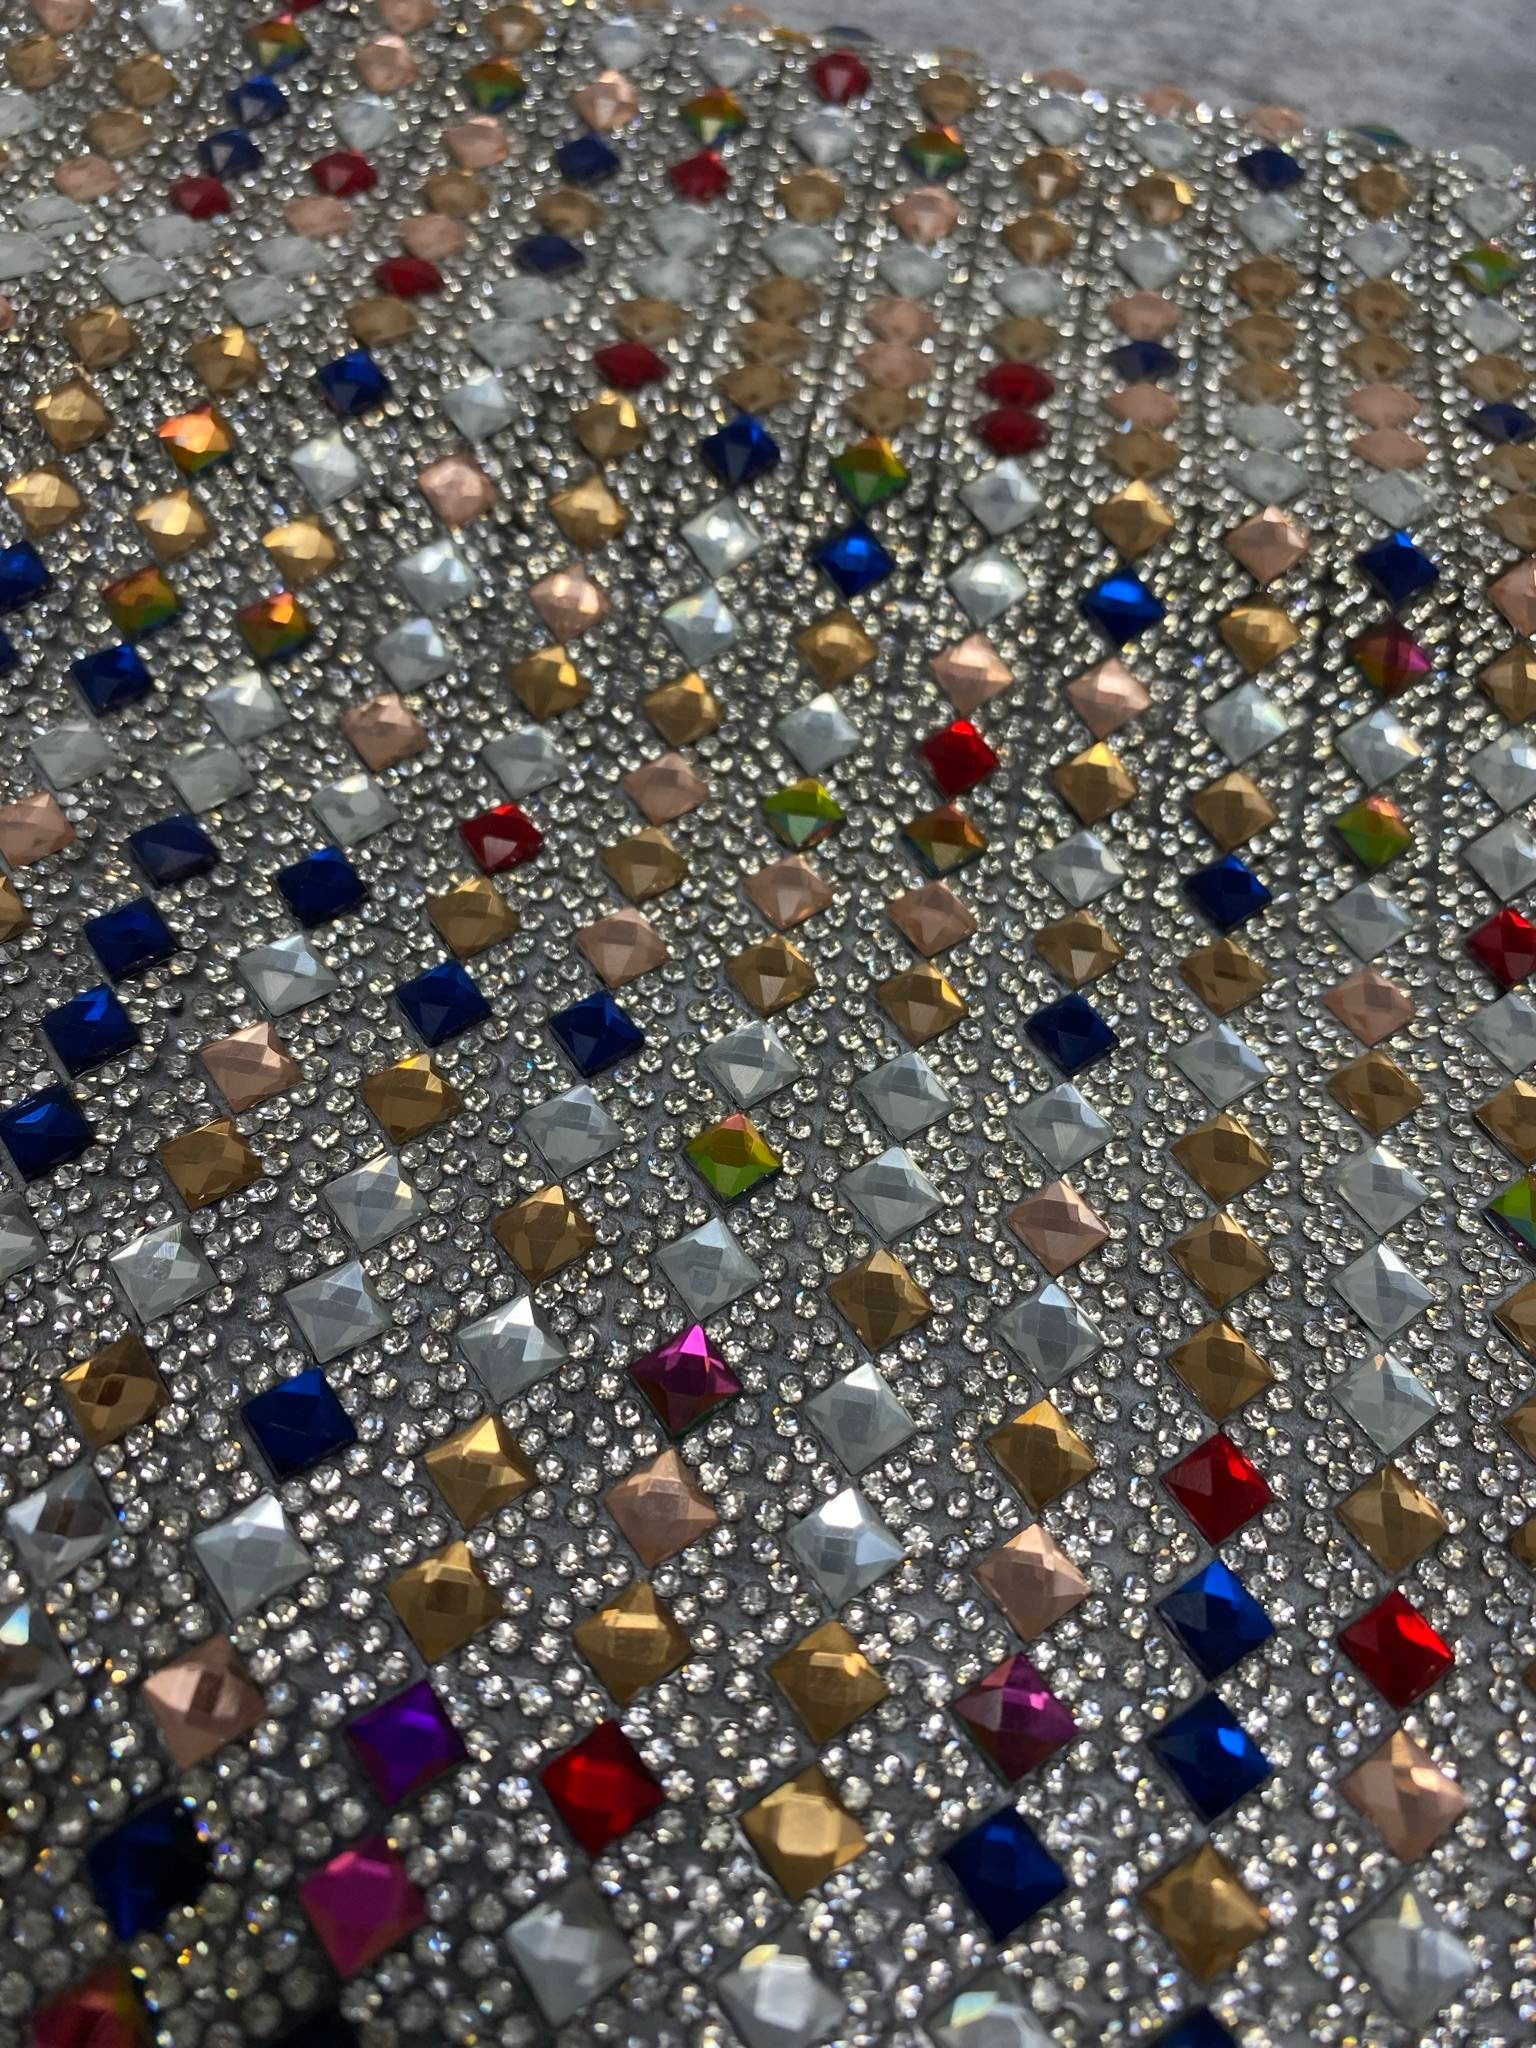 Self-adhesive Rhinestone Sheets for Bling Projects, Clothes, Shoes,  Handbags, Mugs, Wine Glasses & More, 10 X16.5 Sz, 18,000 Stones 